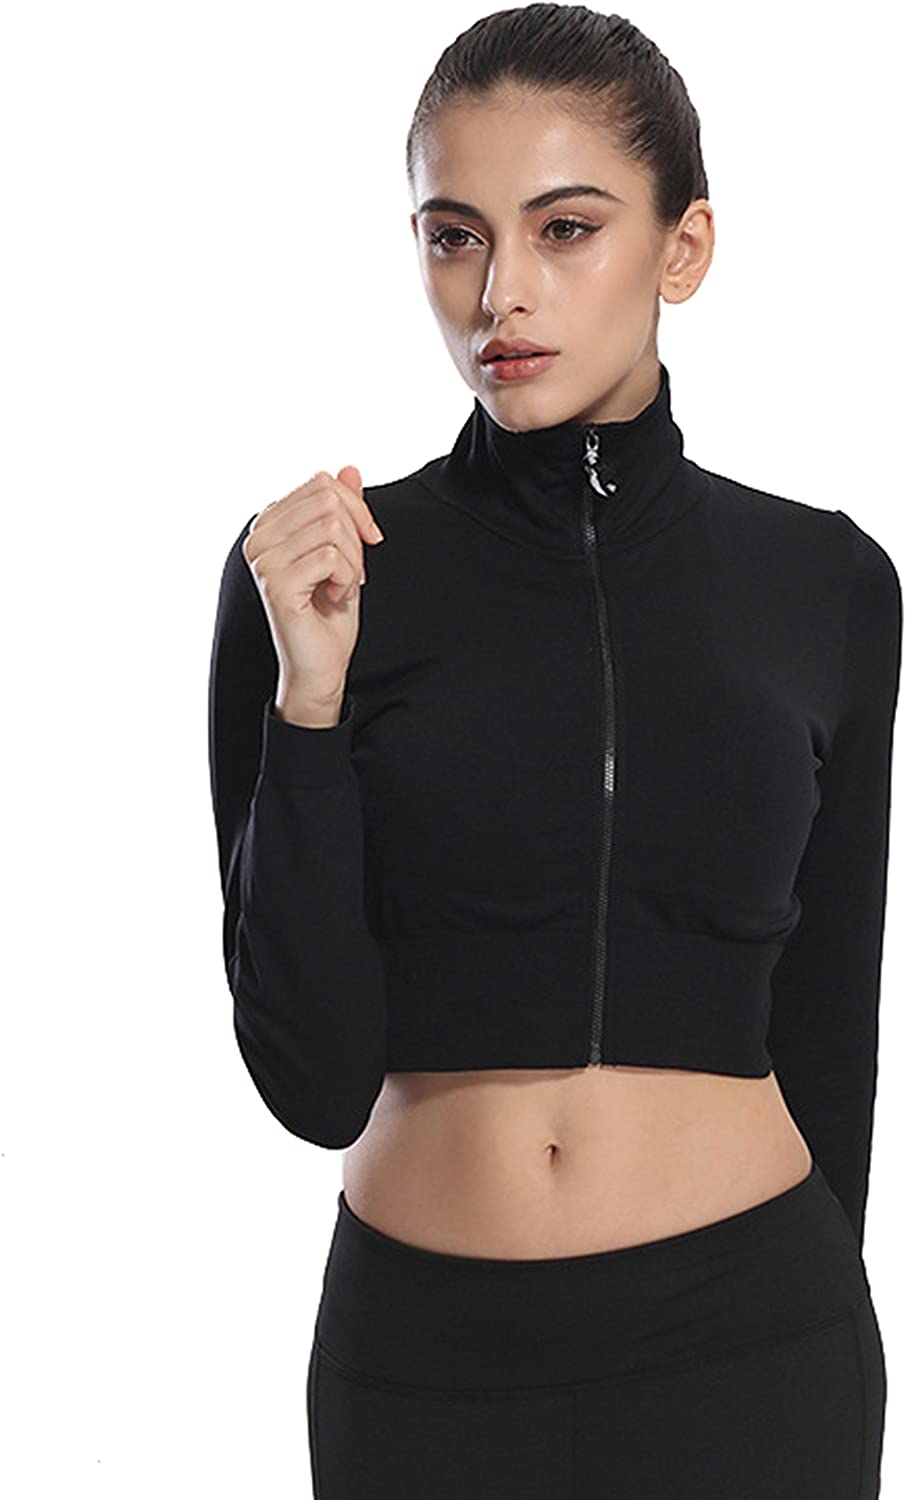 Women's Sports Workout Zip Up Long Sleeve Sweetshirt Fitted Crop Top